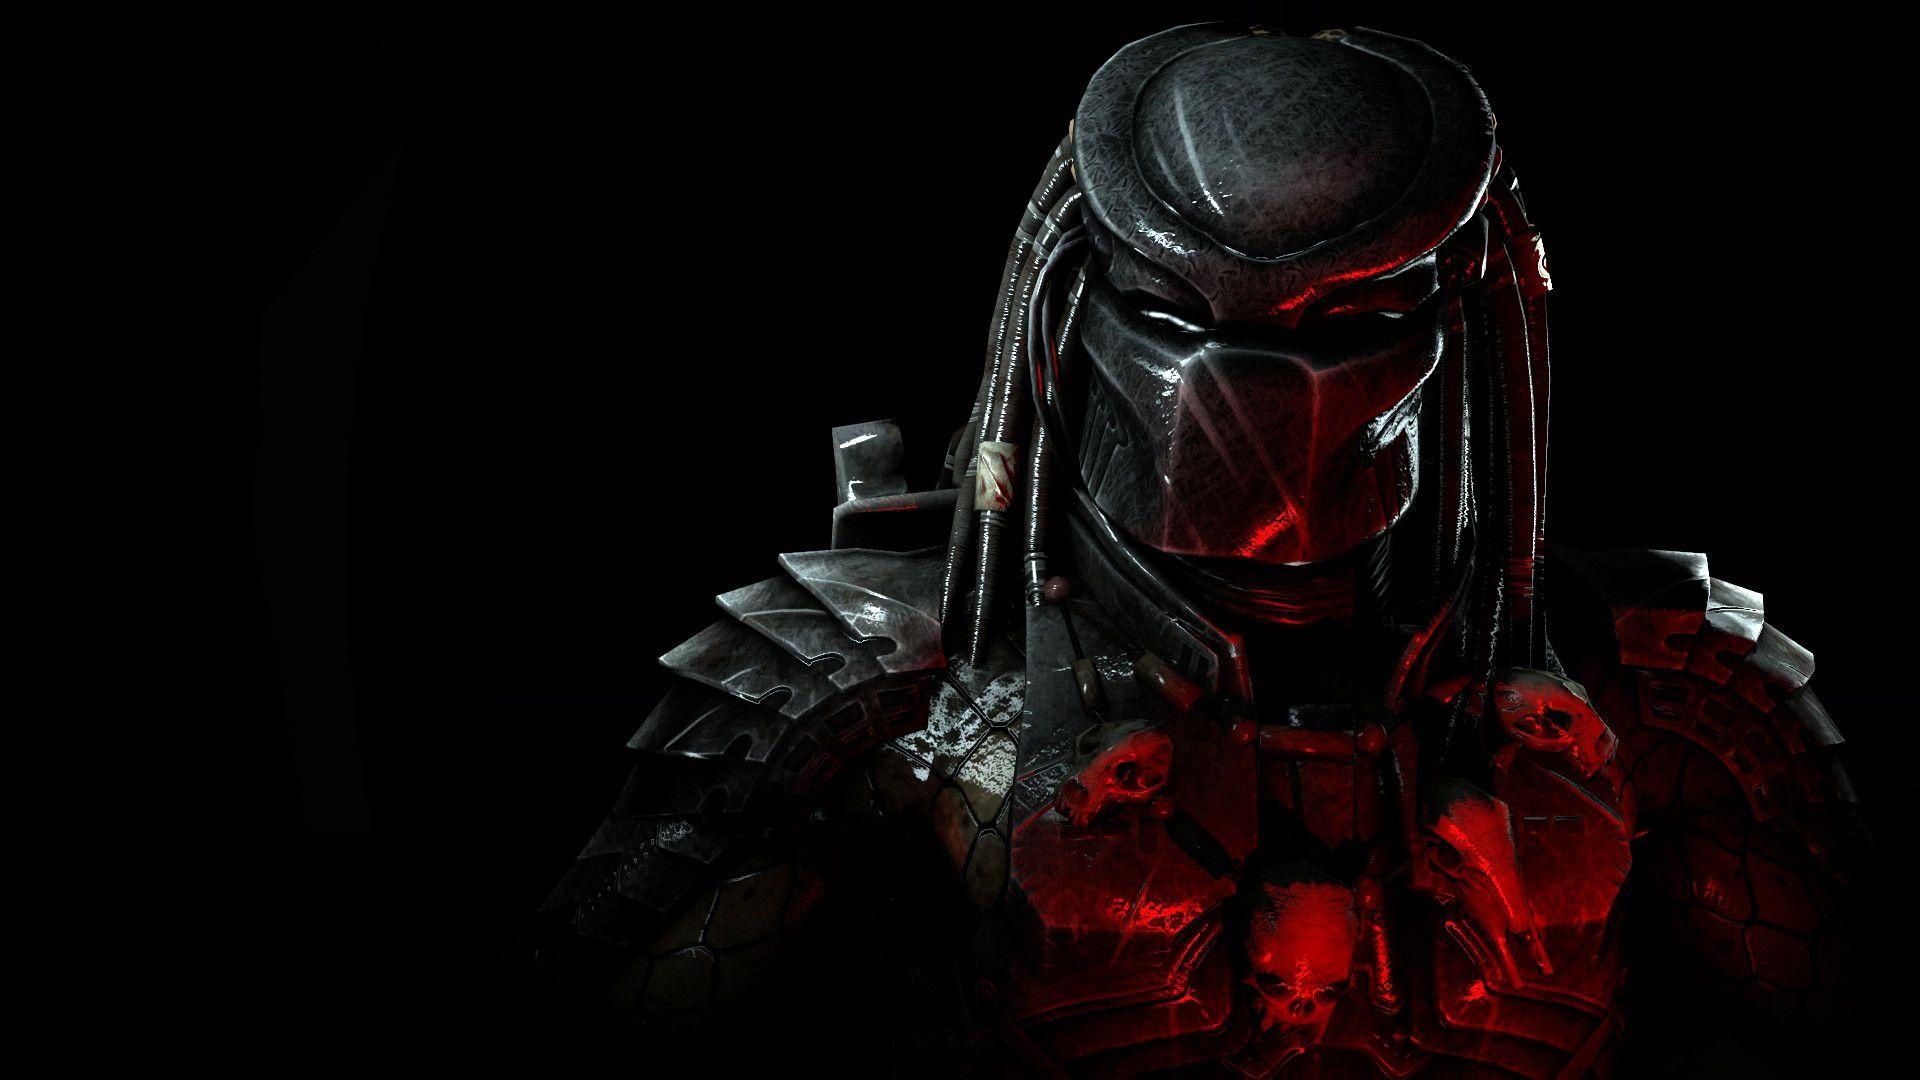 Predator: Use a highly advanced technology, such as active camouflage and energy weapons. 1920x1080 Full HD Background.